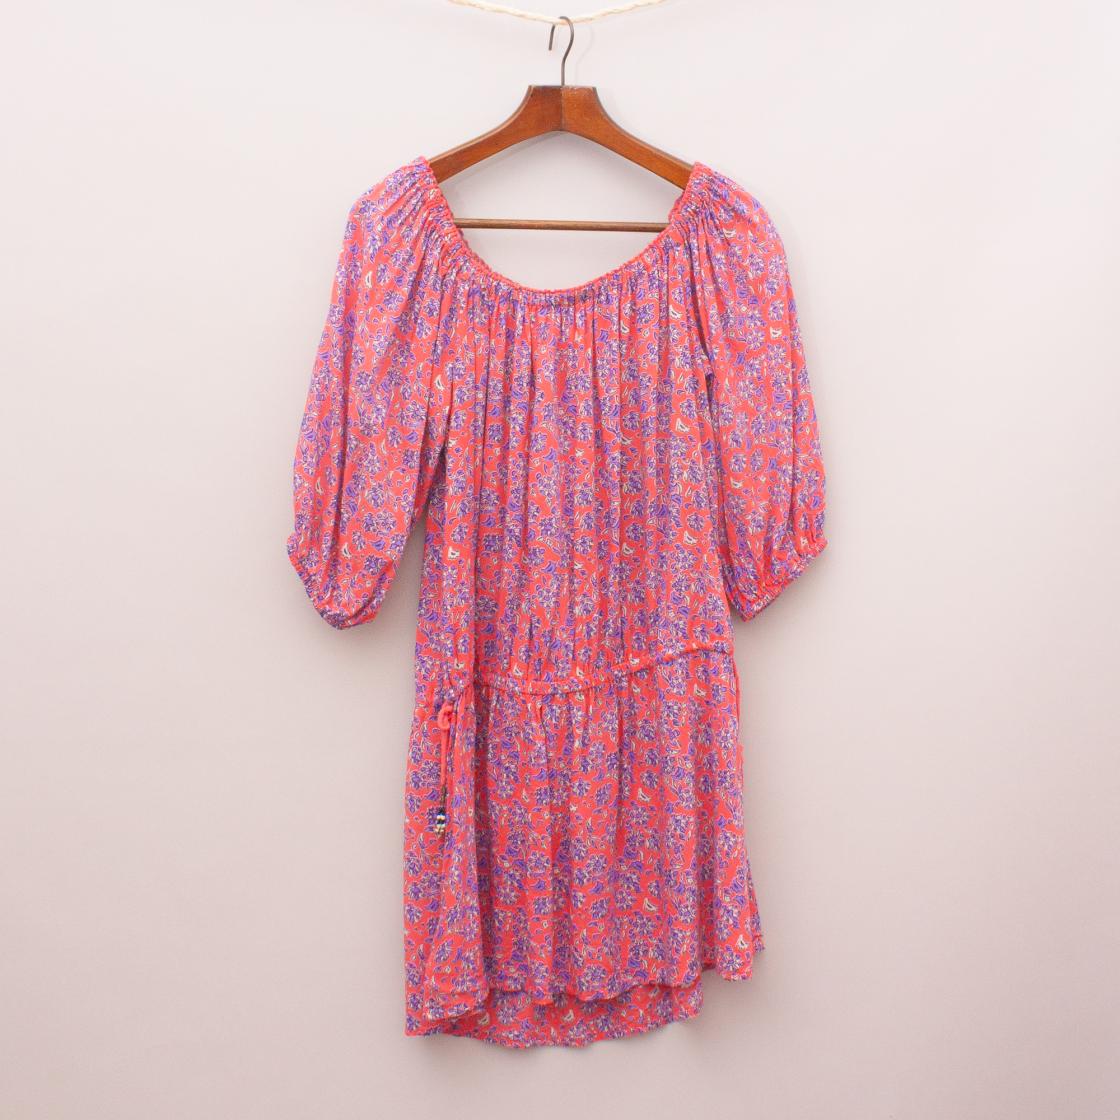 Tigerlily Patterned Peasant Dress